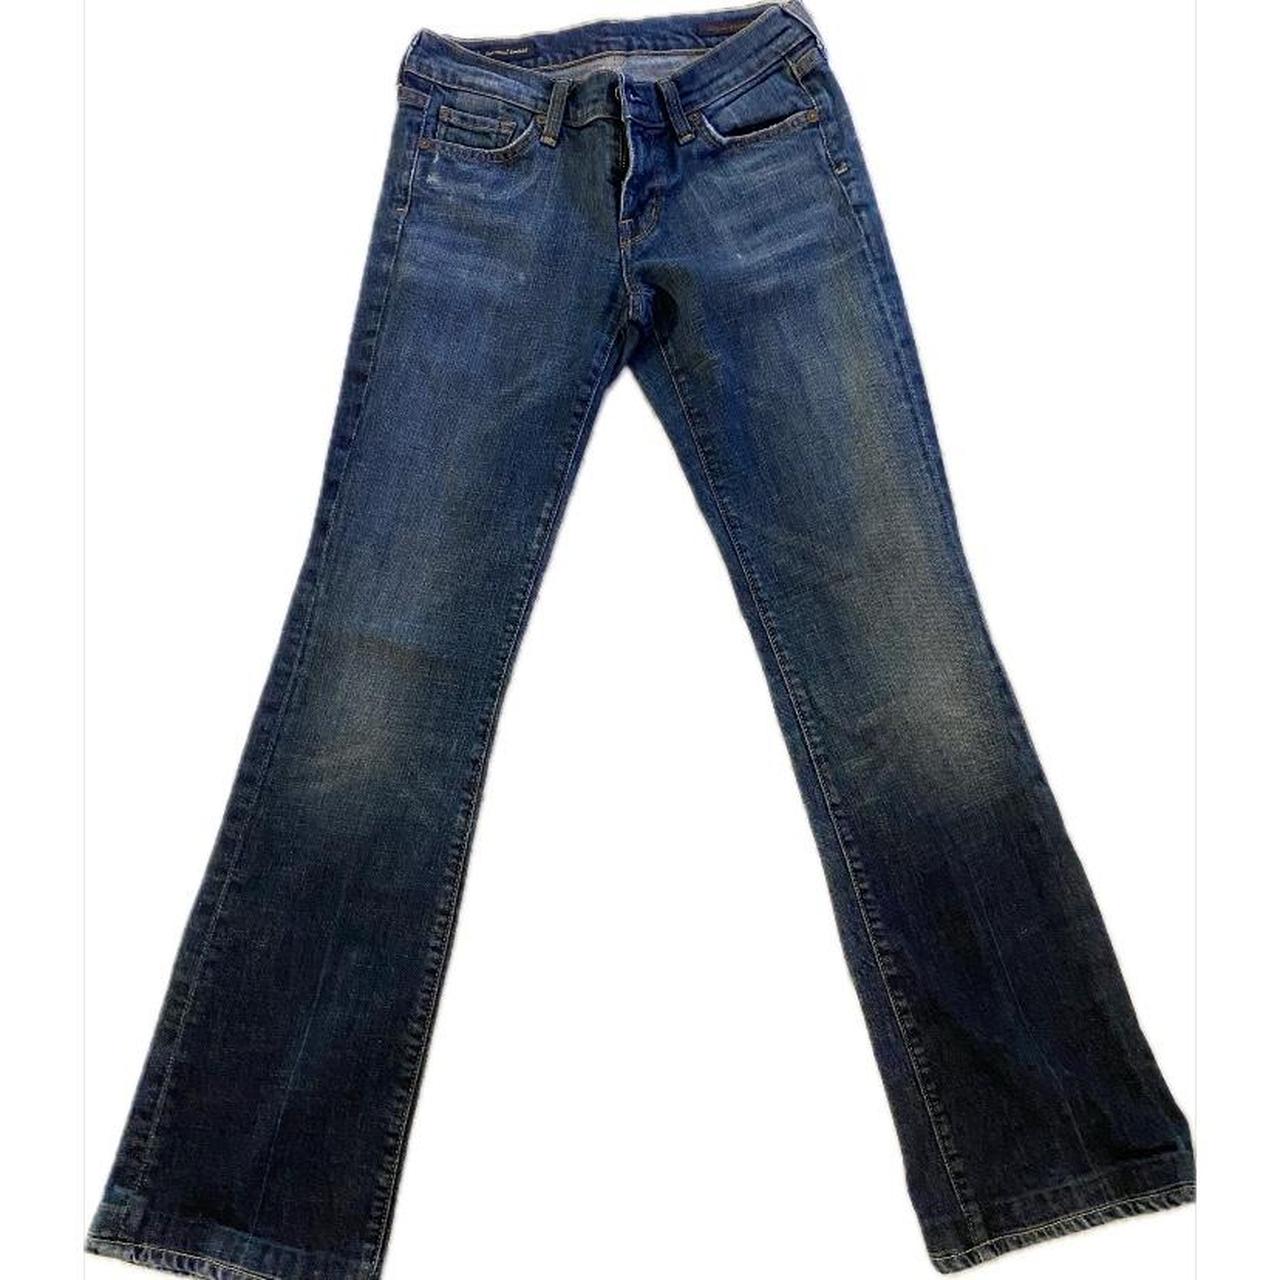 Y2K vintage low rise bootcut citizens of humanity